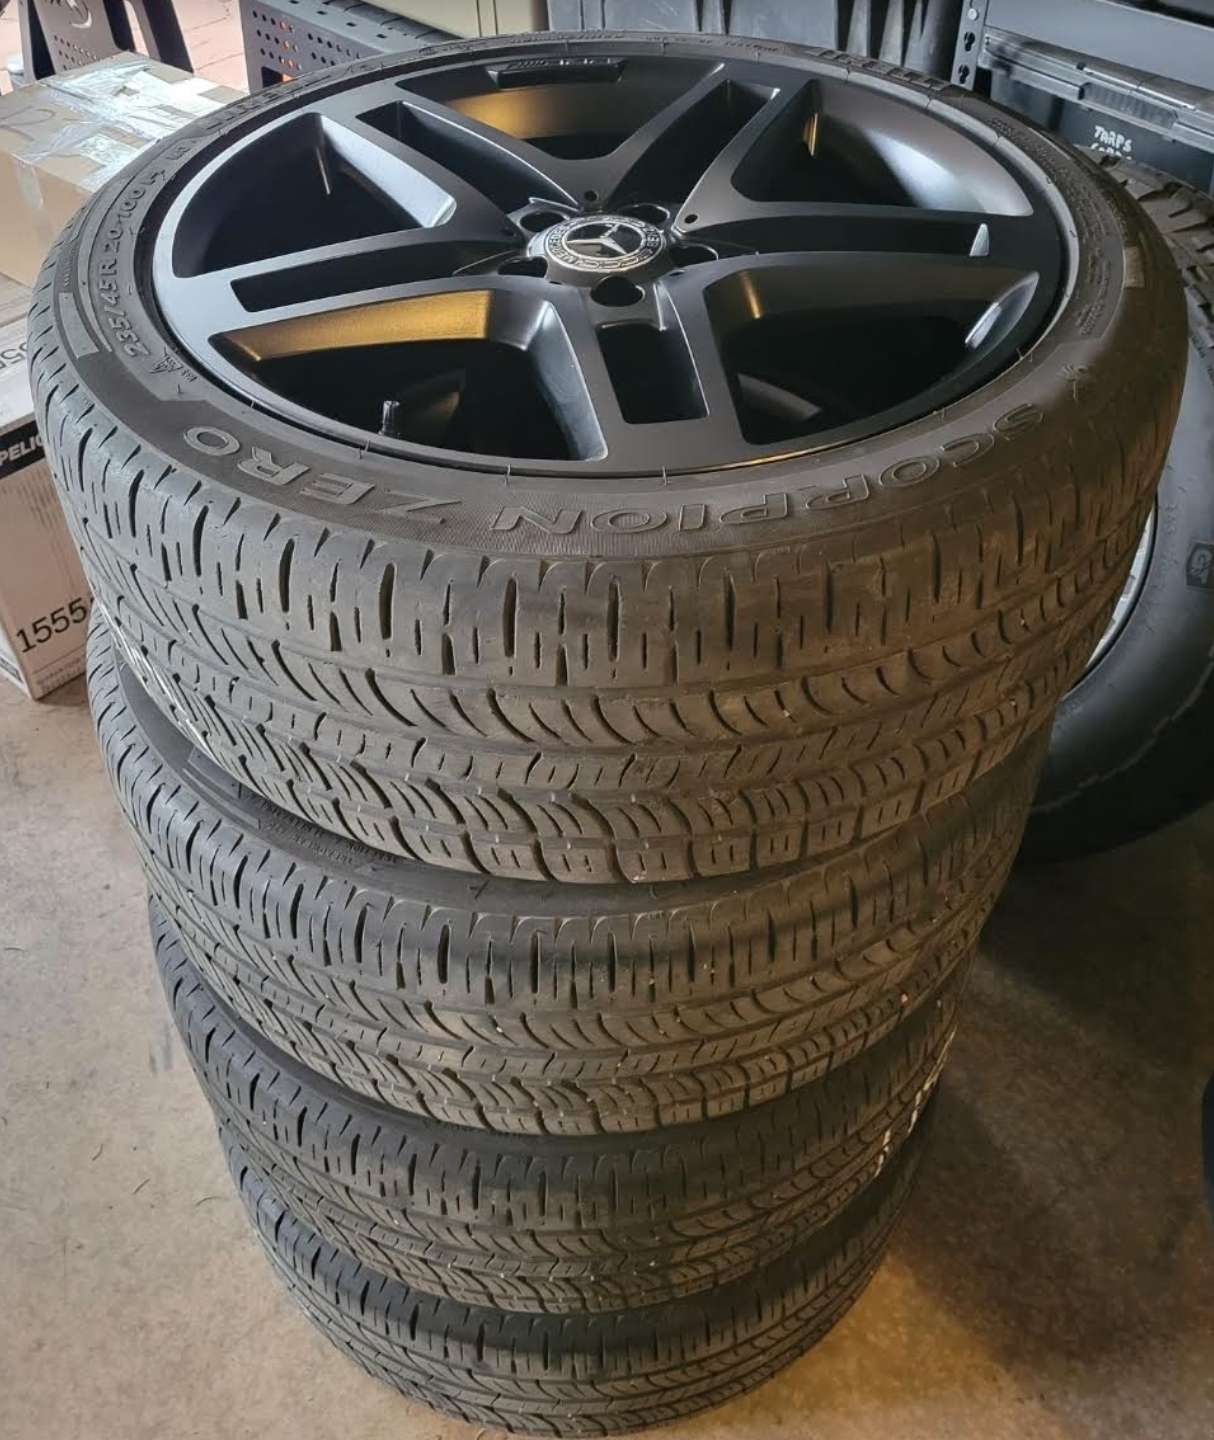 Wheels and Tires/Axles - AMG Wheels And Tires - Refreshed - Used - 0  All Models - Colorado Springs, CO 80904, United States